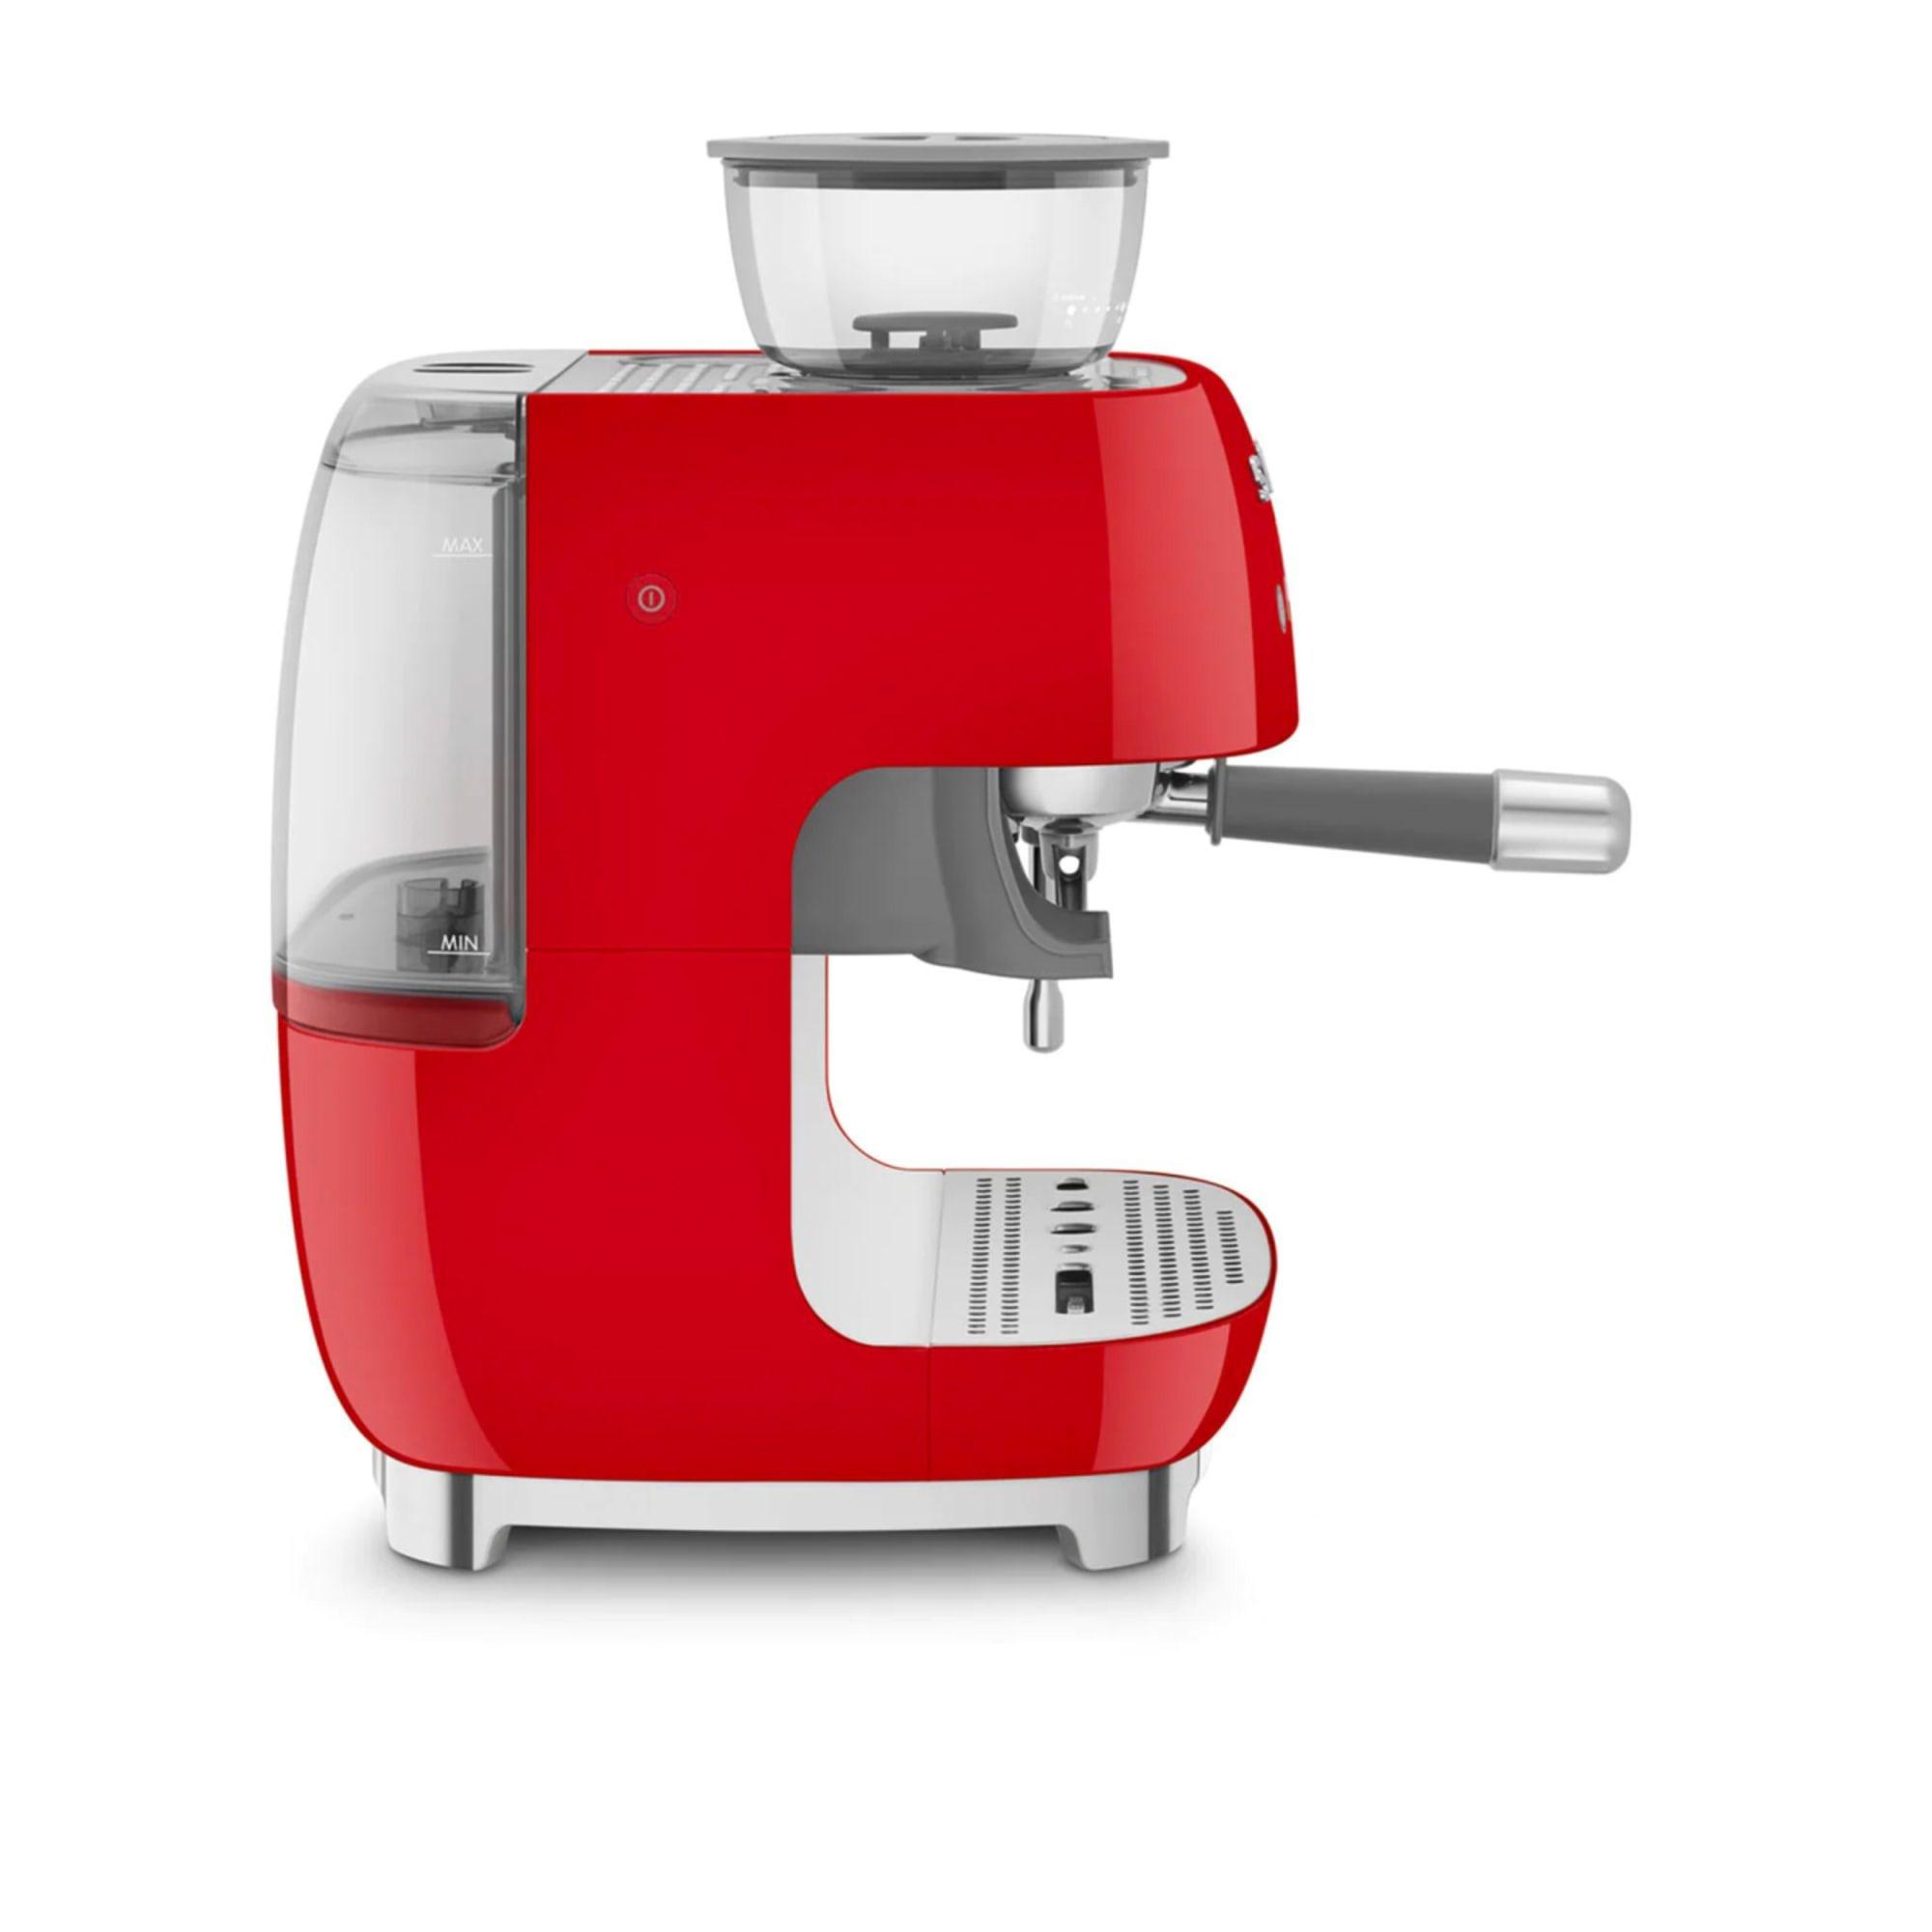 Smeg 50's Retro Style Espresso Machine with Built In Grinder Red Image 3